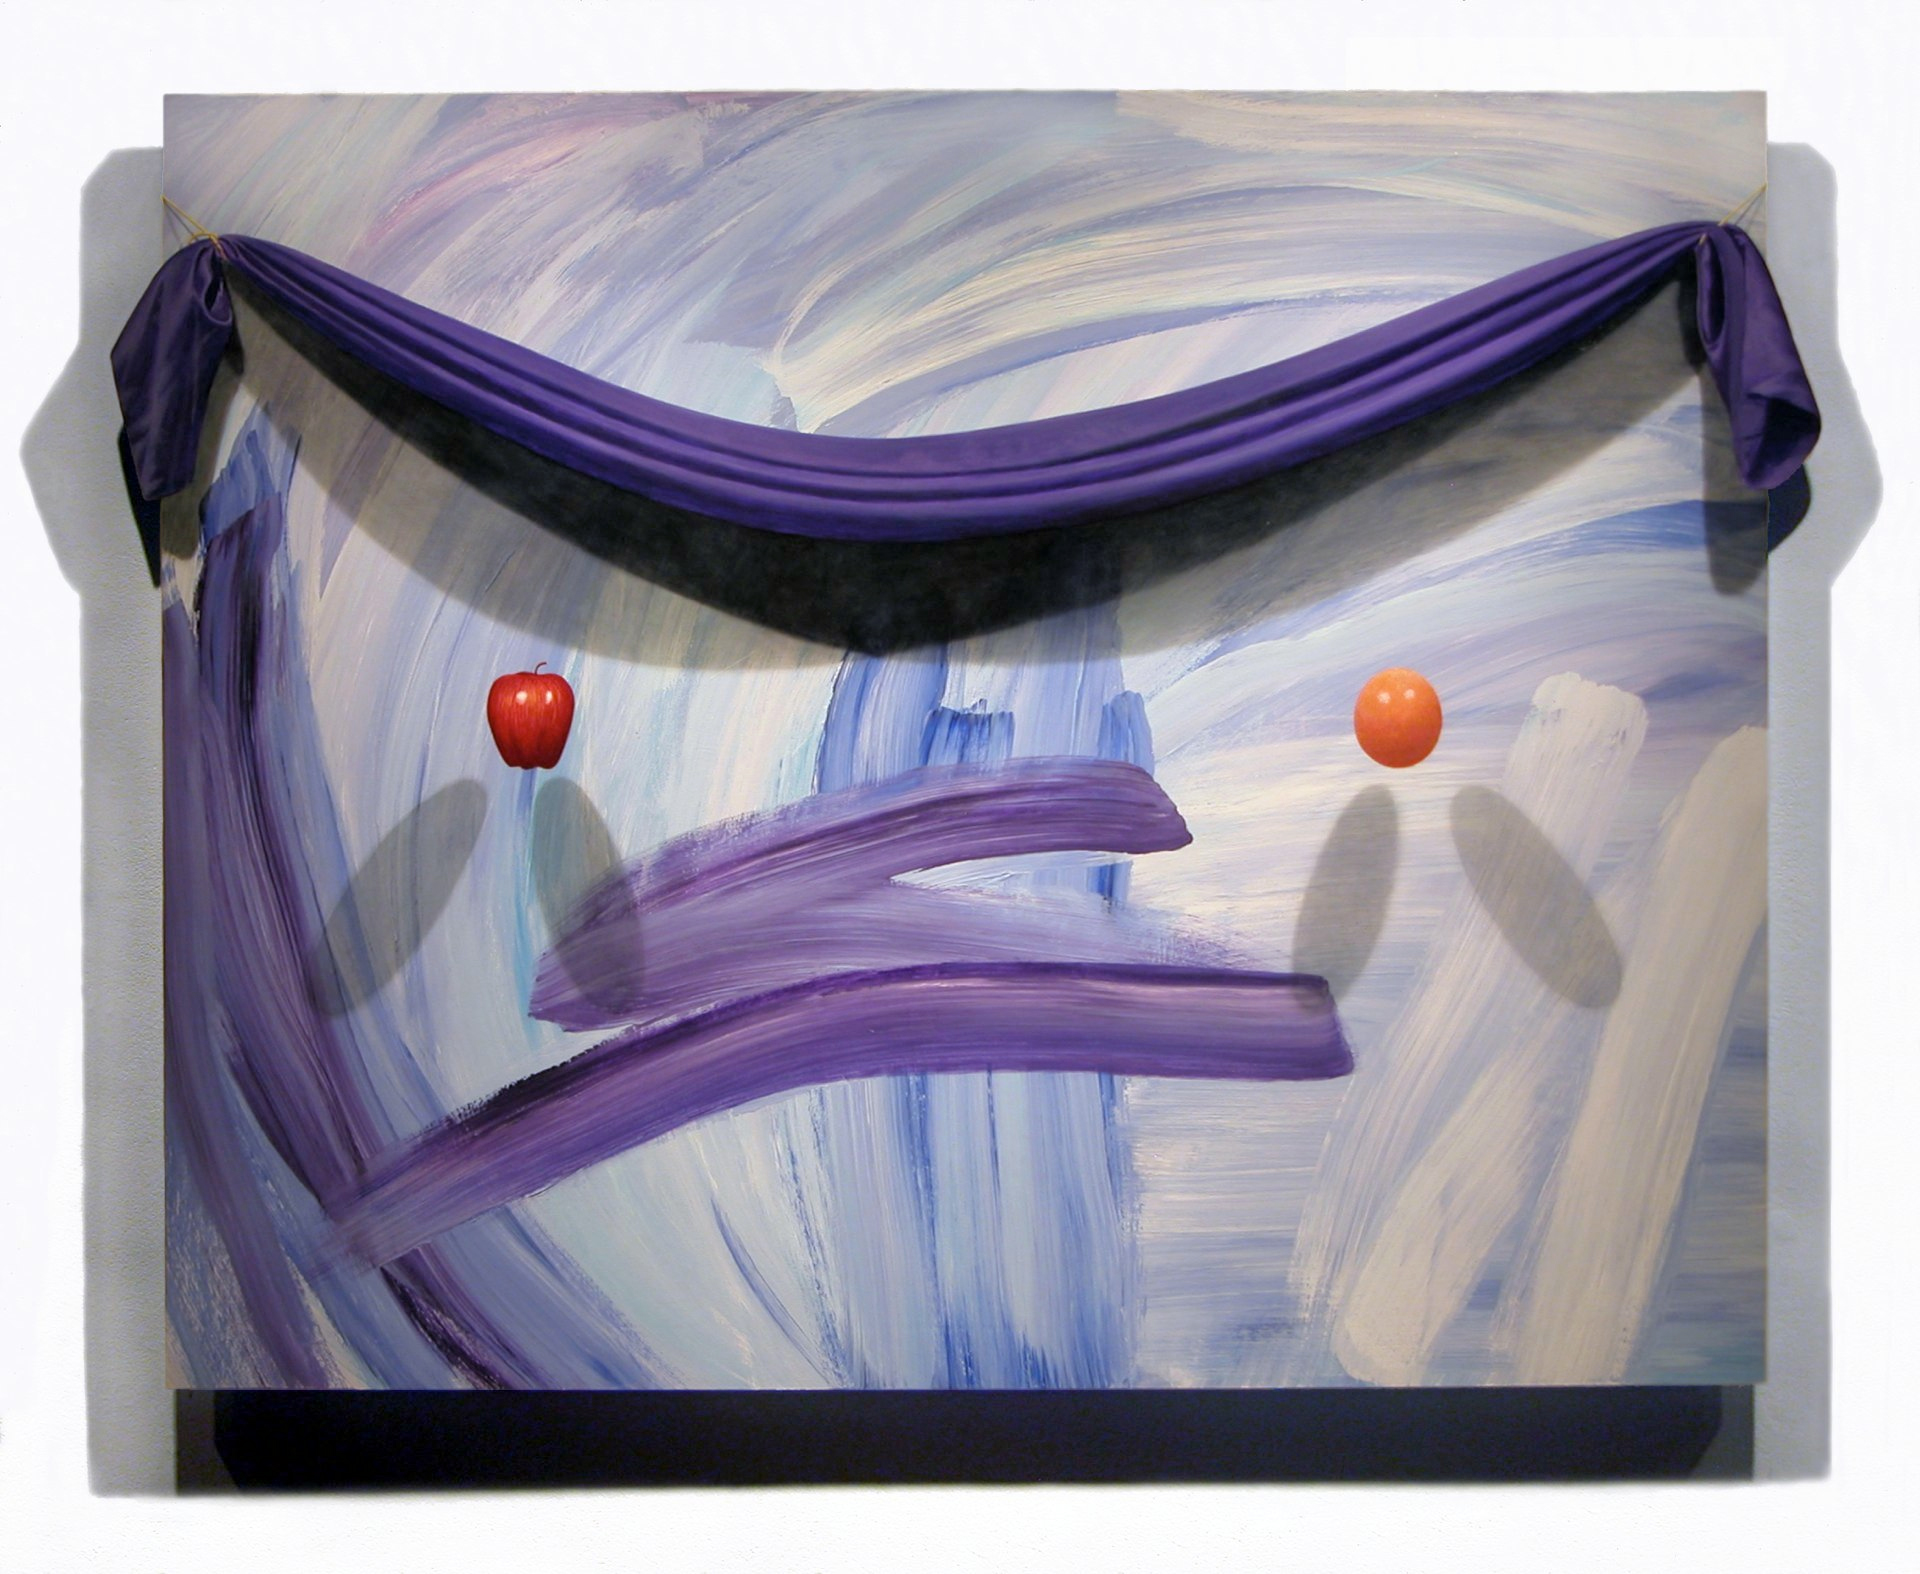 painting of abstract face with draped purple fabric, floating apple and orange